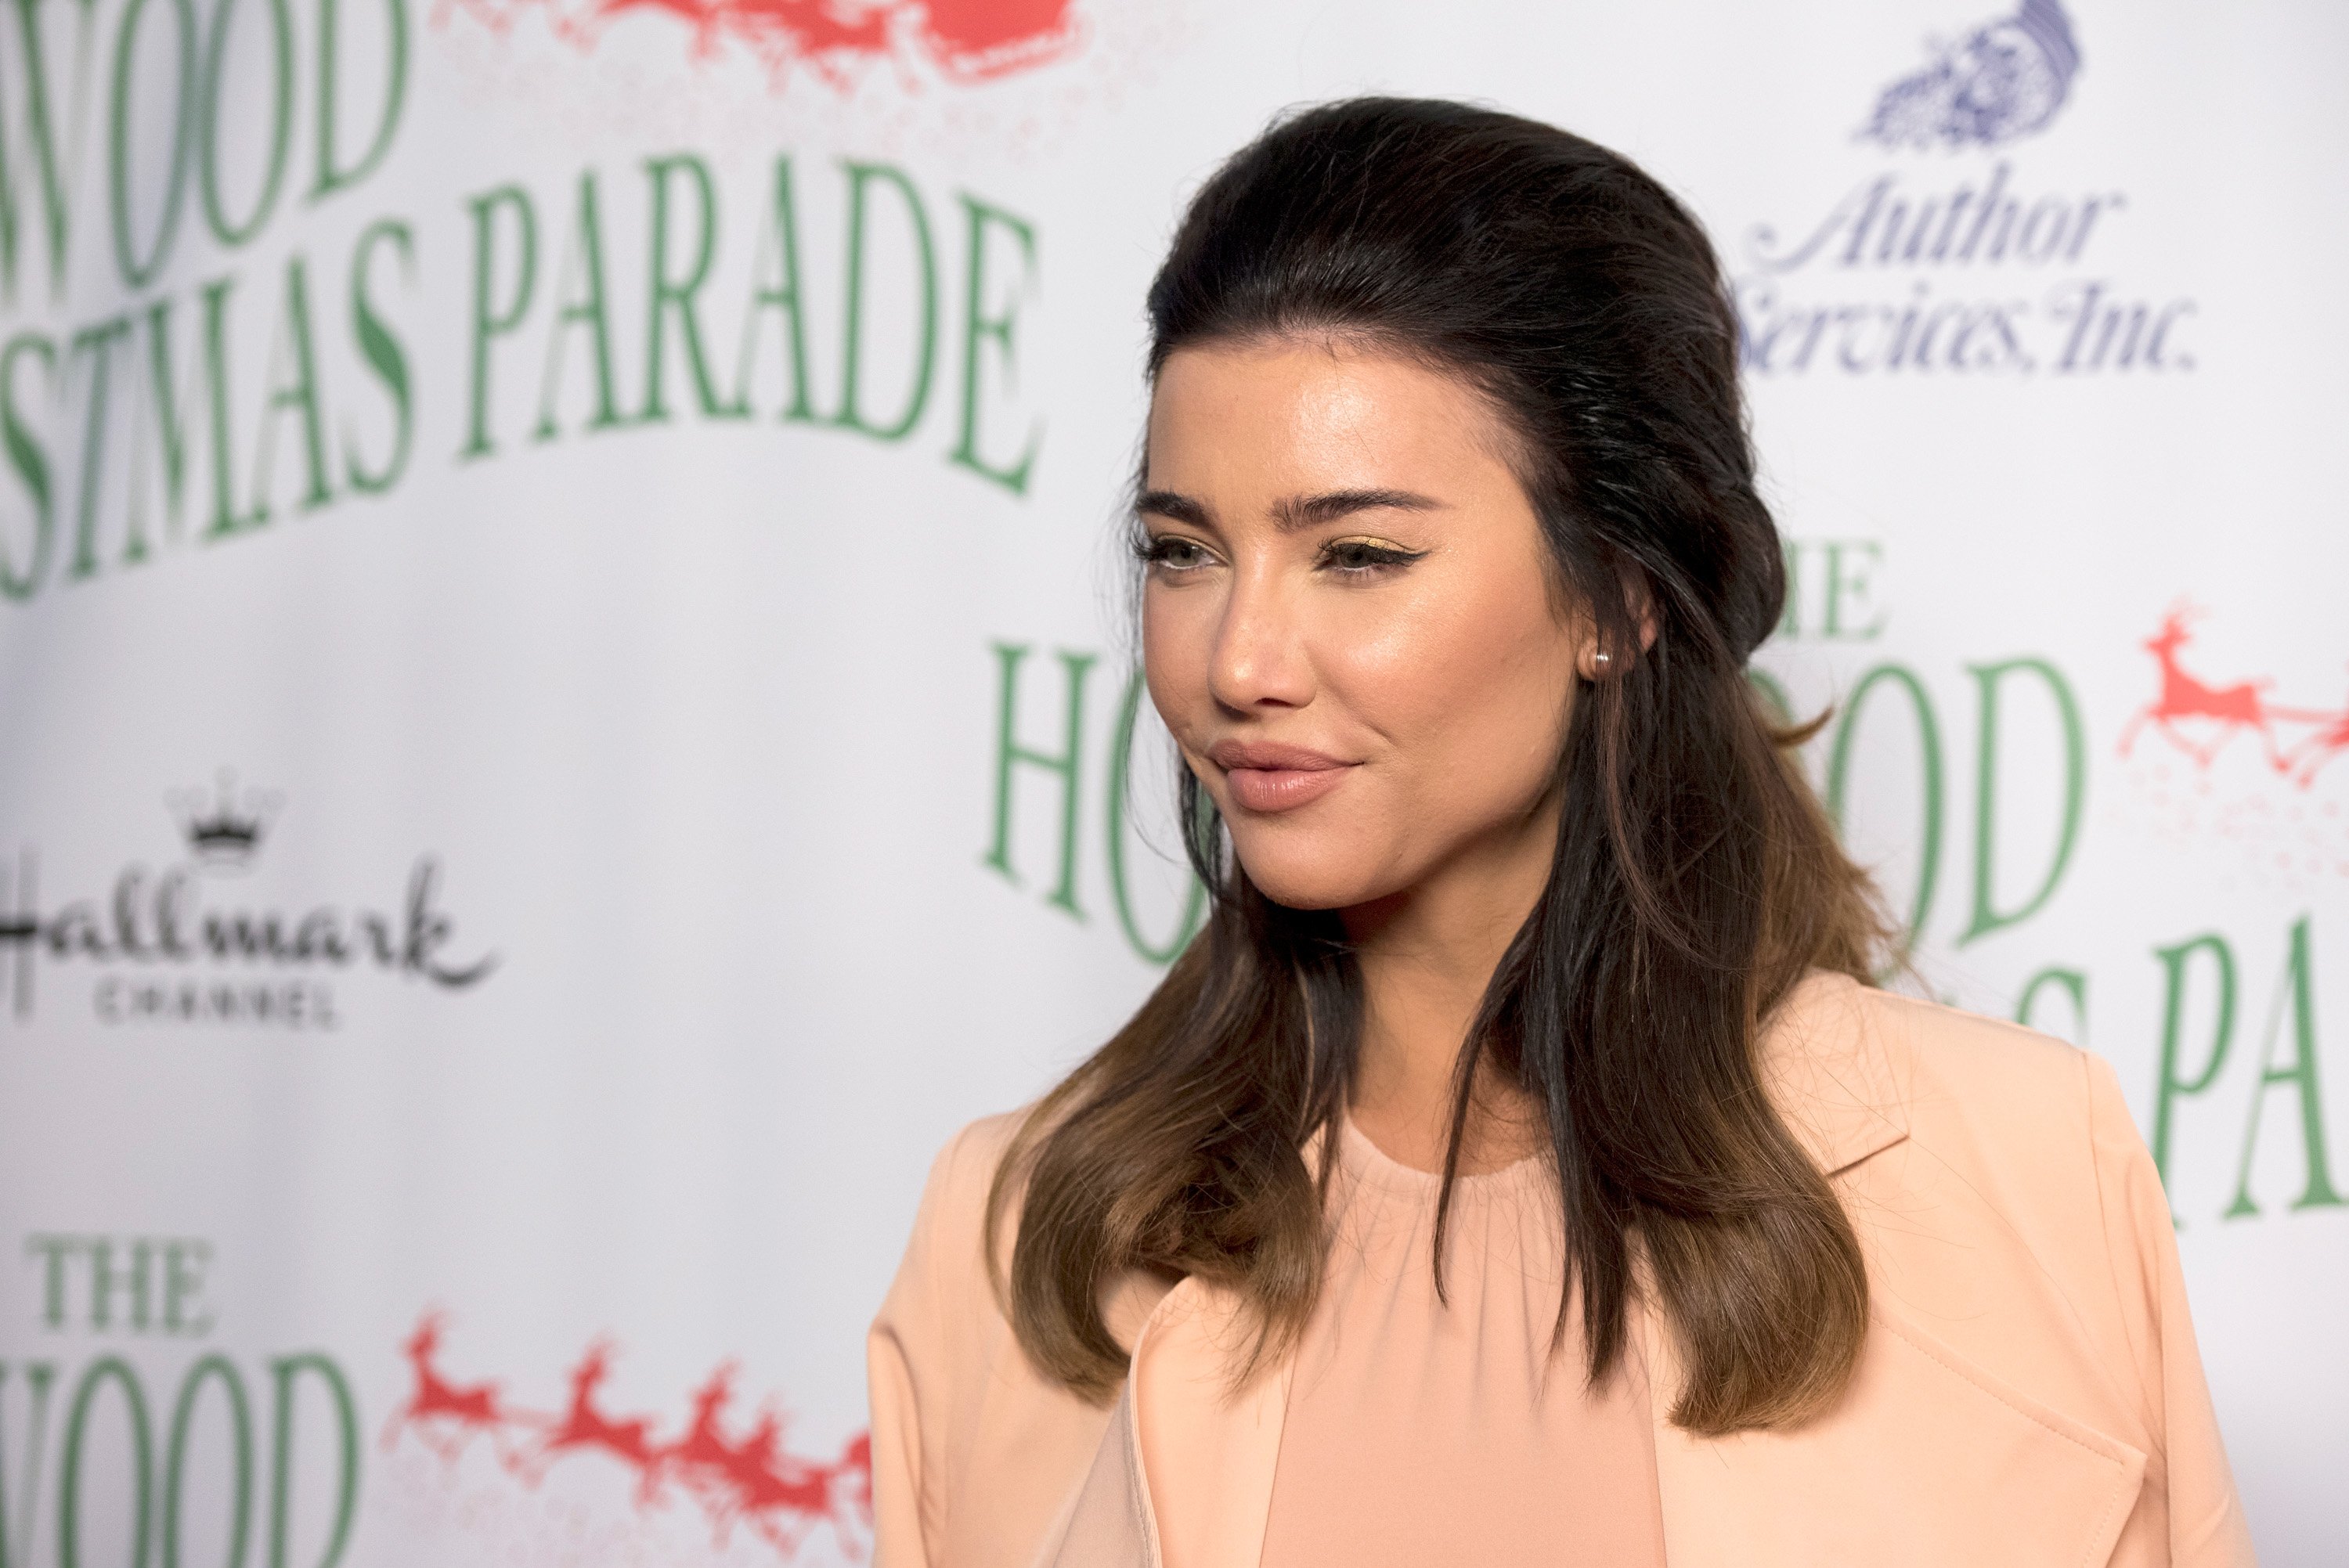 'The Bold and the Beautiful' star Jacqueline MacInnes Wood wearing a peach colored sweater and jacket during a Christmas parade.